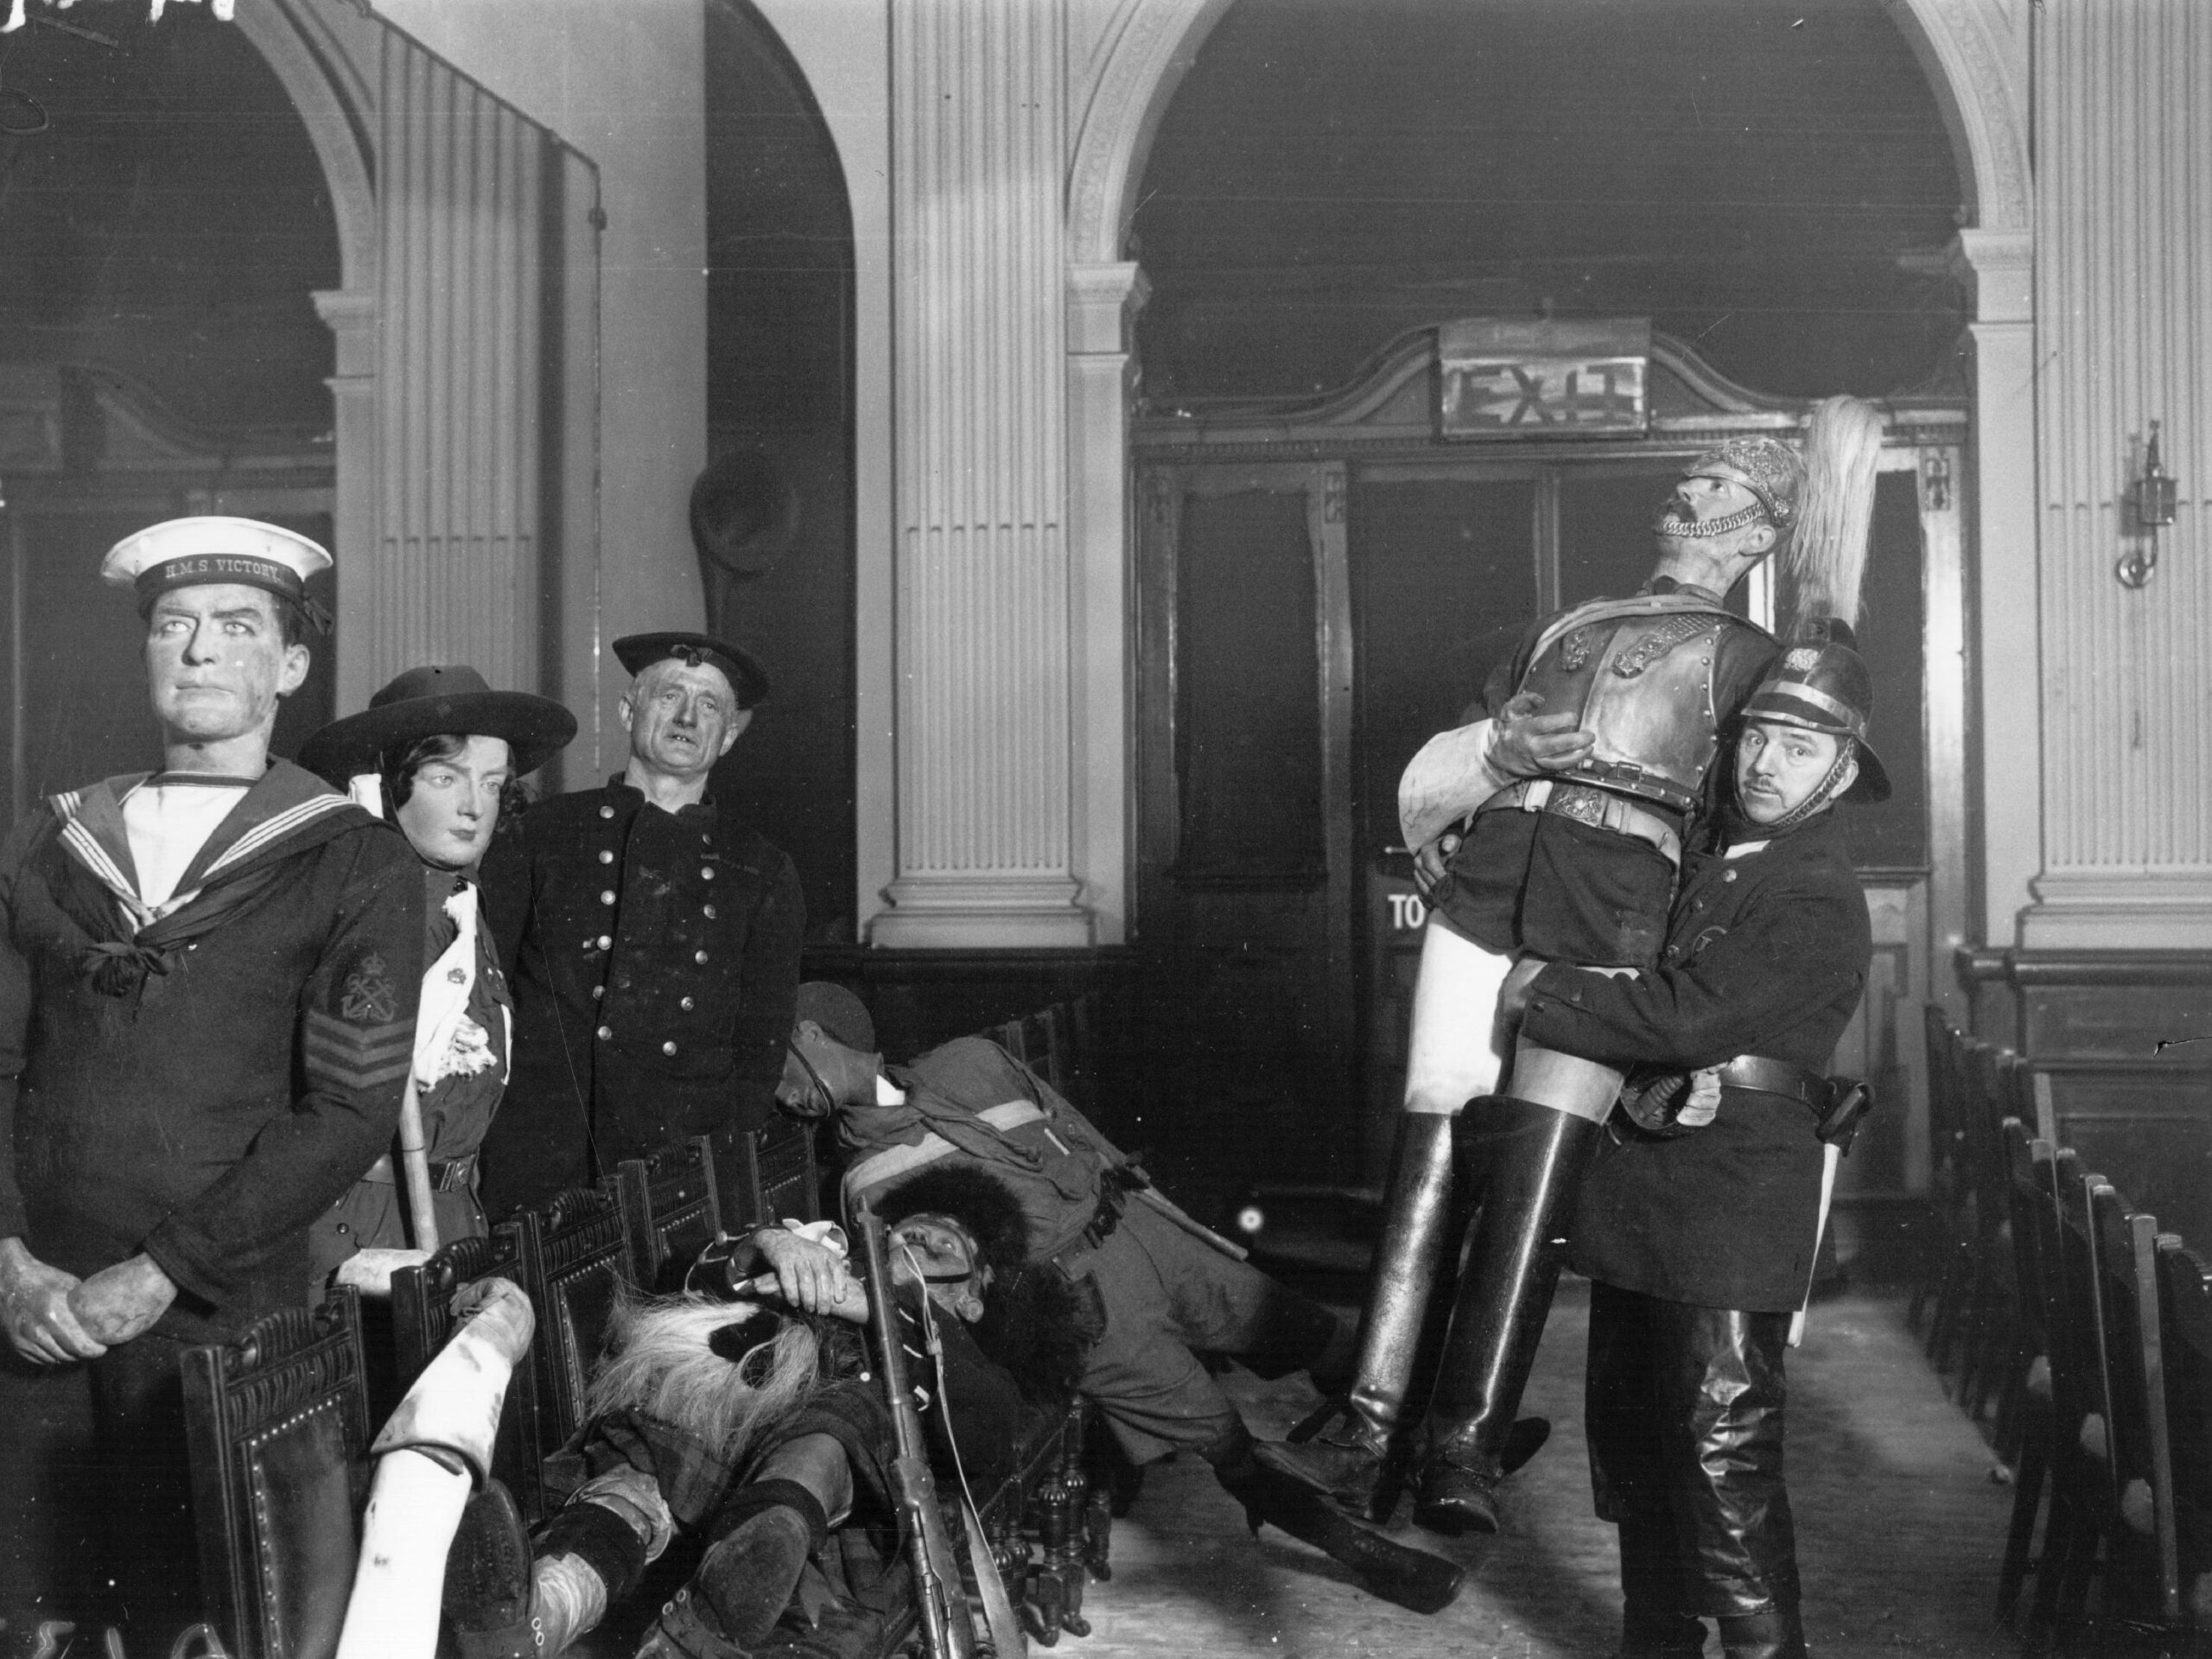 A fireman with some of the wax figures that were saved, after the fire at the famous waxworks, Madame Tussaud&#39;s in London	March 01, 1925